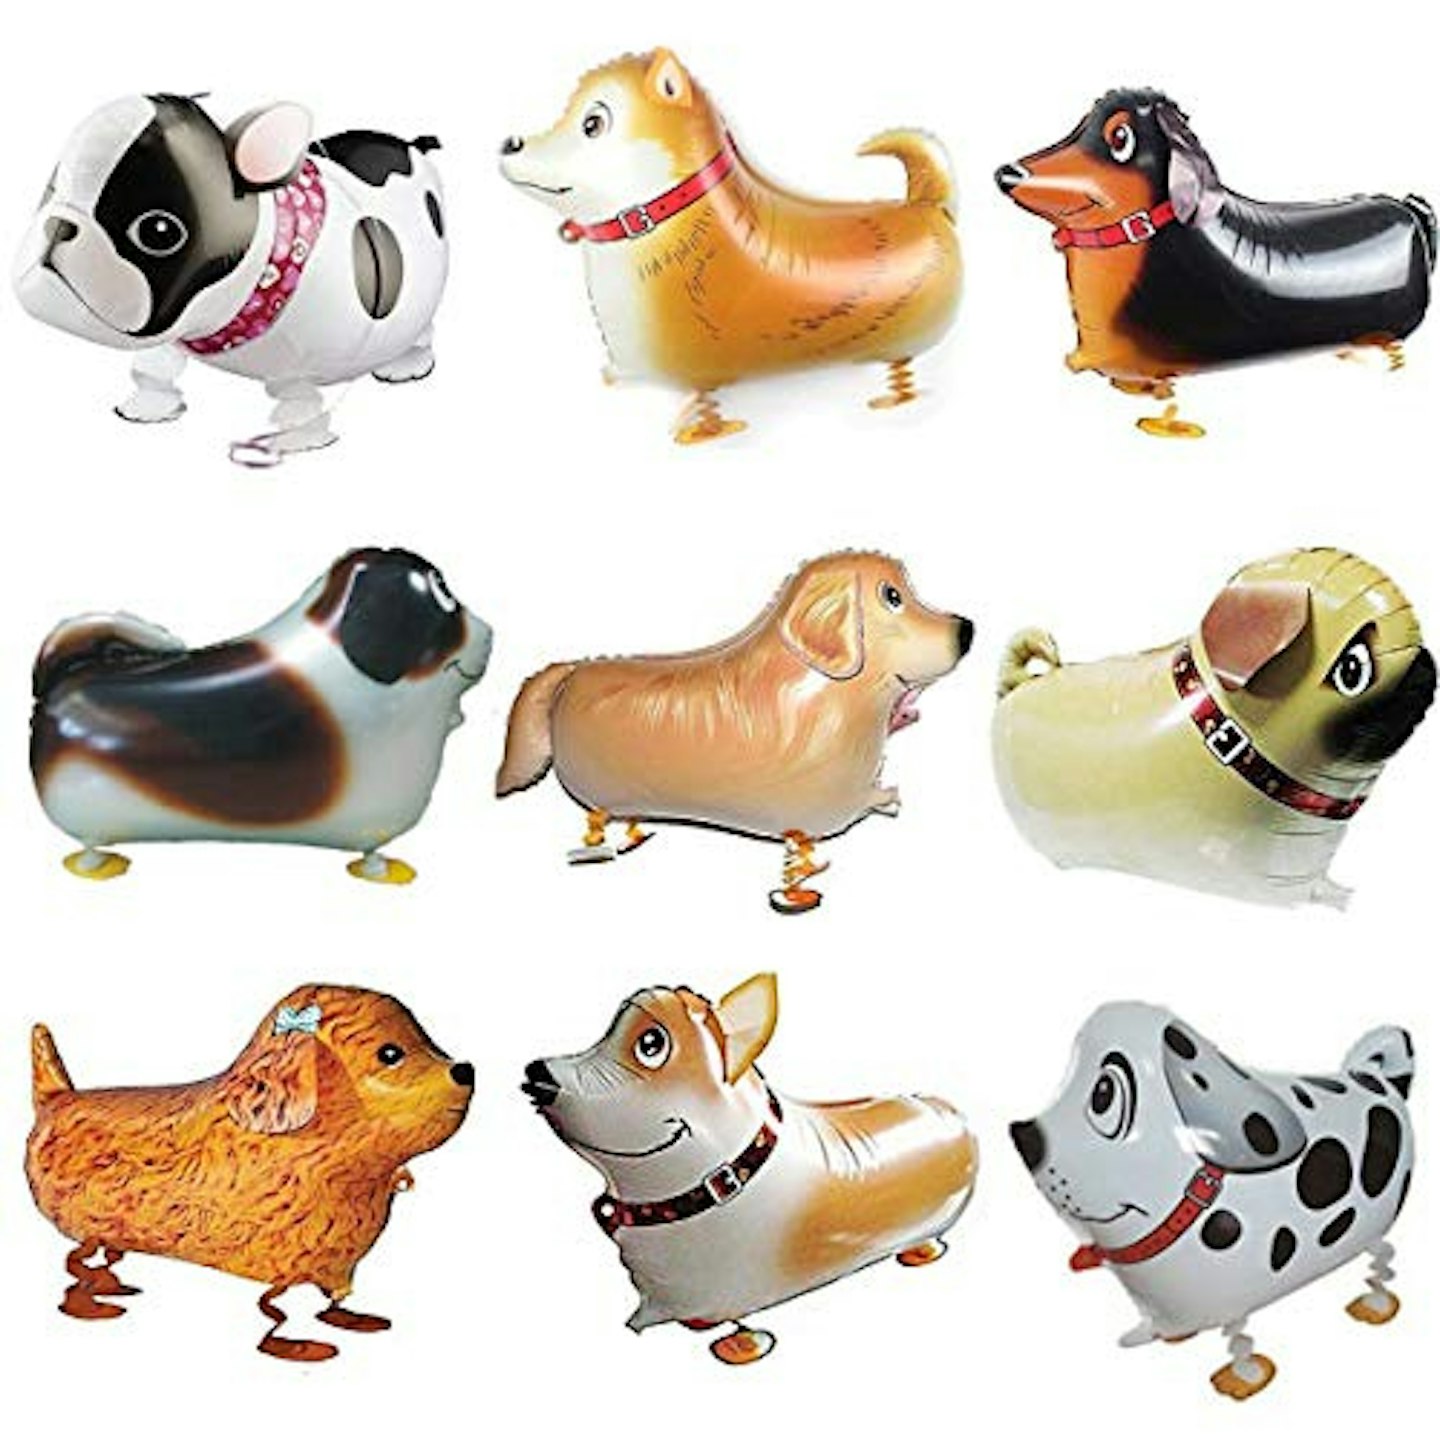 BESYZY Walking Animal Balloons with 9pcs